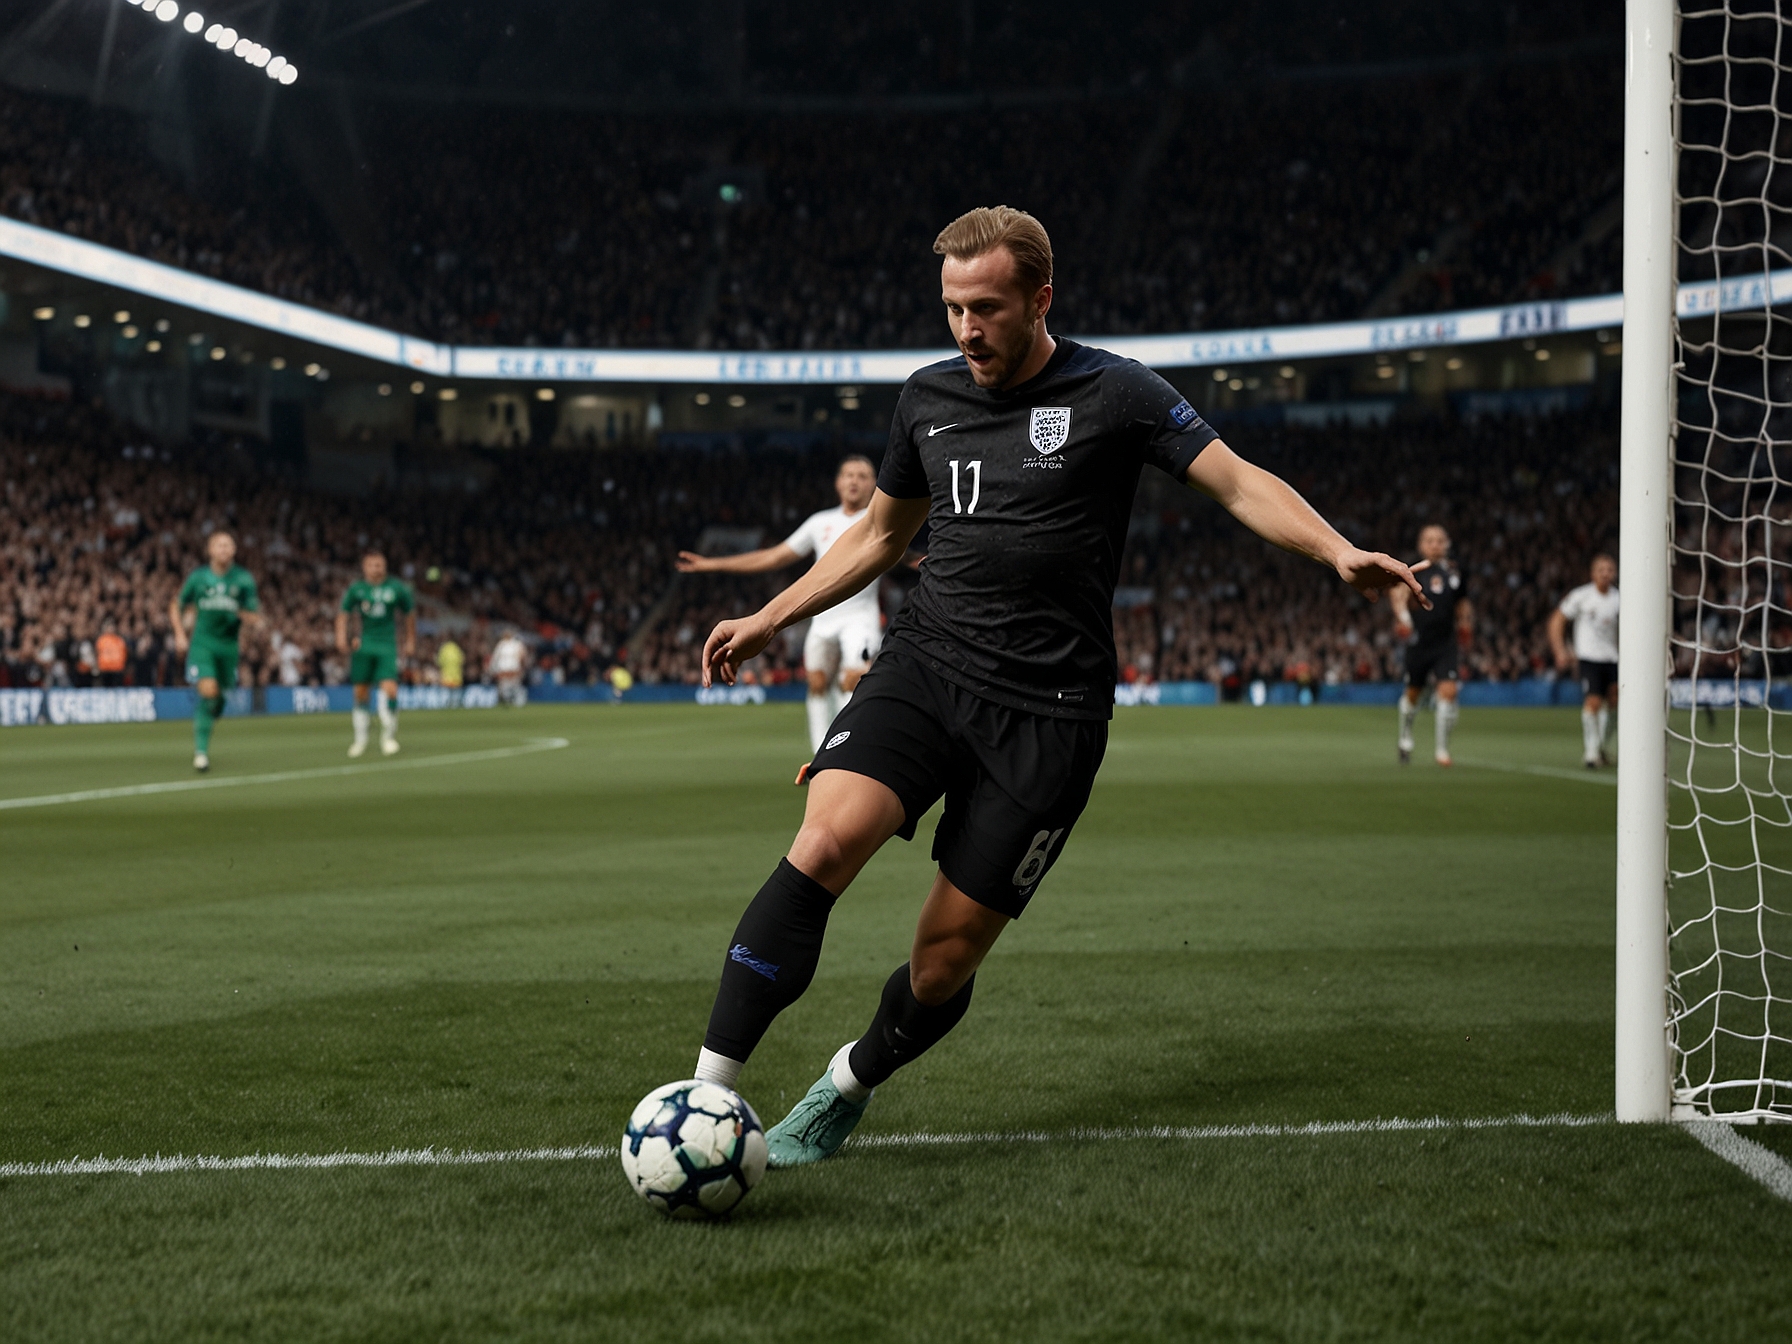 Harry Kane scores the equalizer for England with a composed finish after a superb through-ball from Jack Grealish, bringing the match level in the thrilling UEFA Nations League encounter.